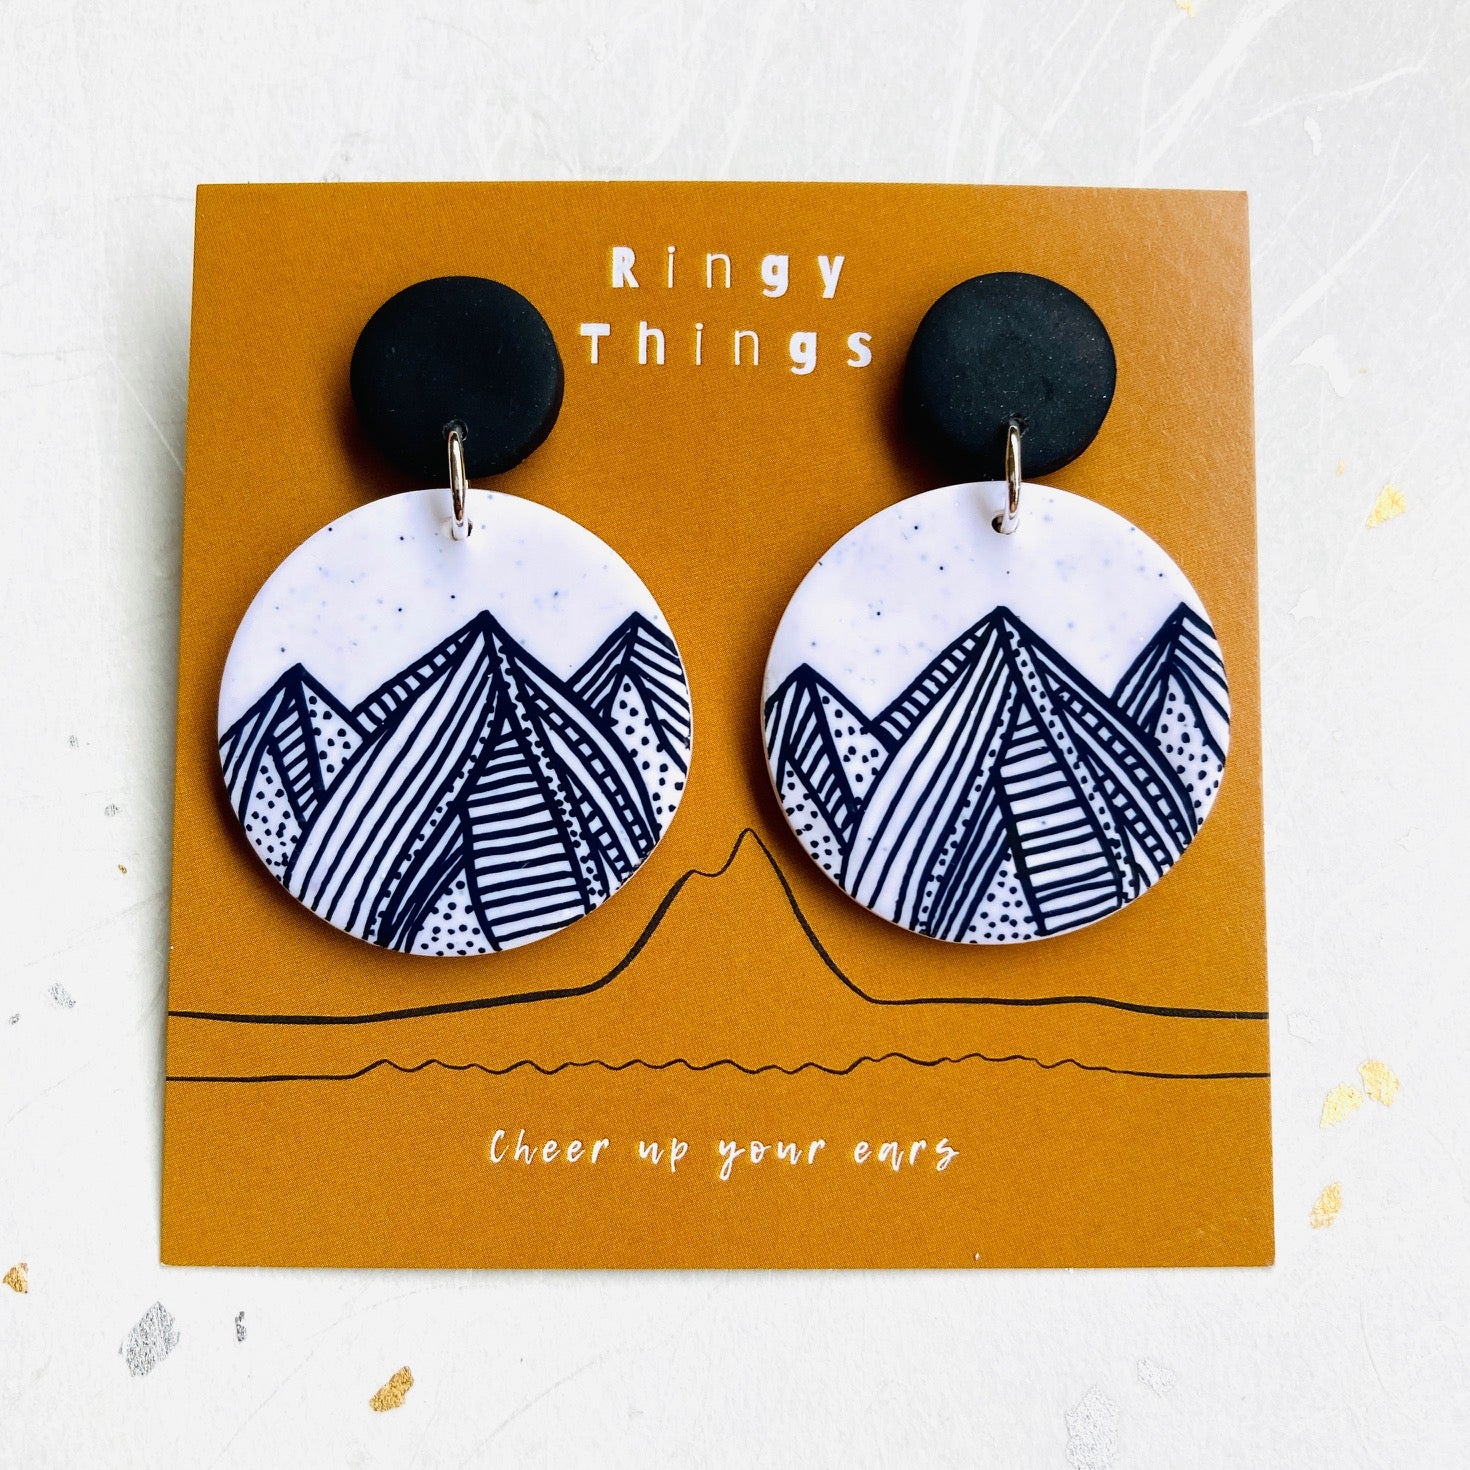 Doodle Mountains - Round Dangles 01